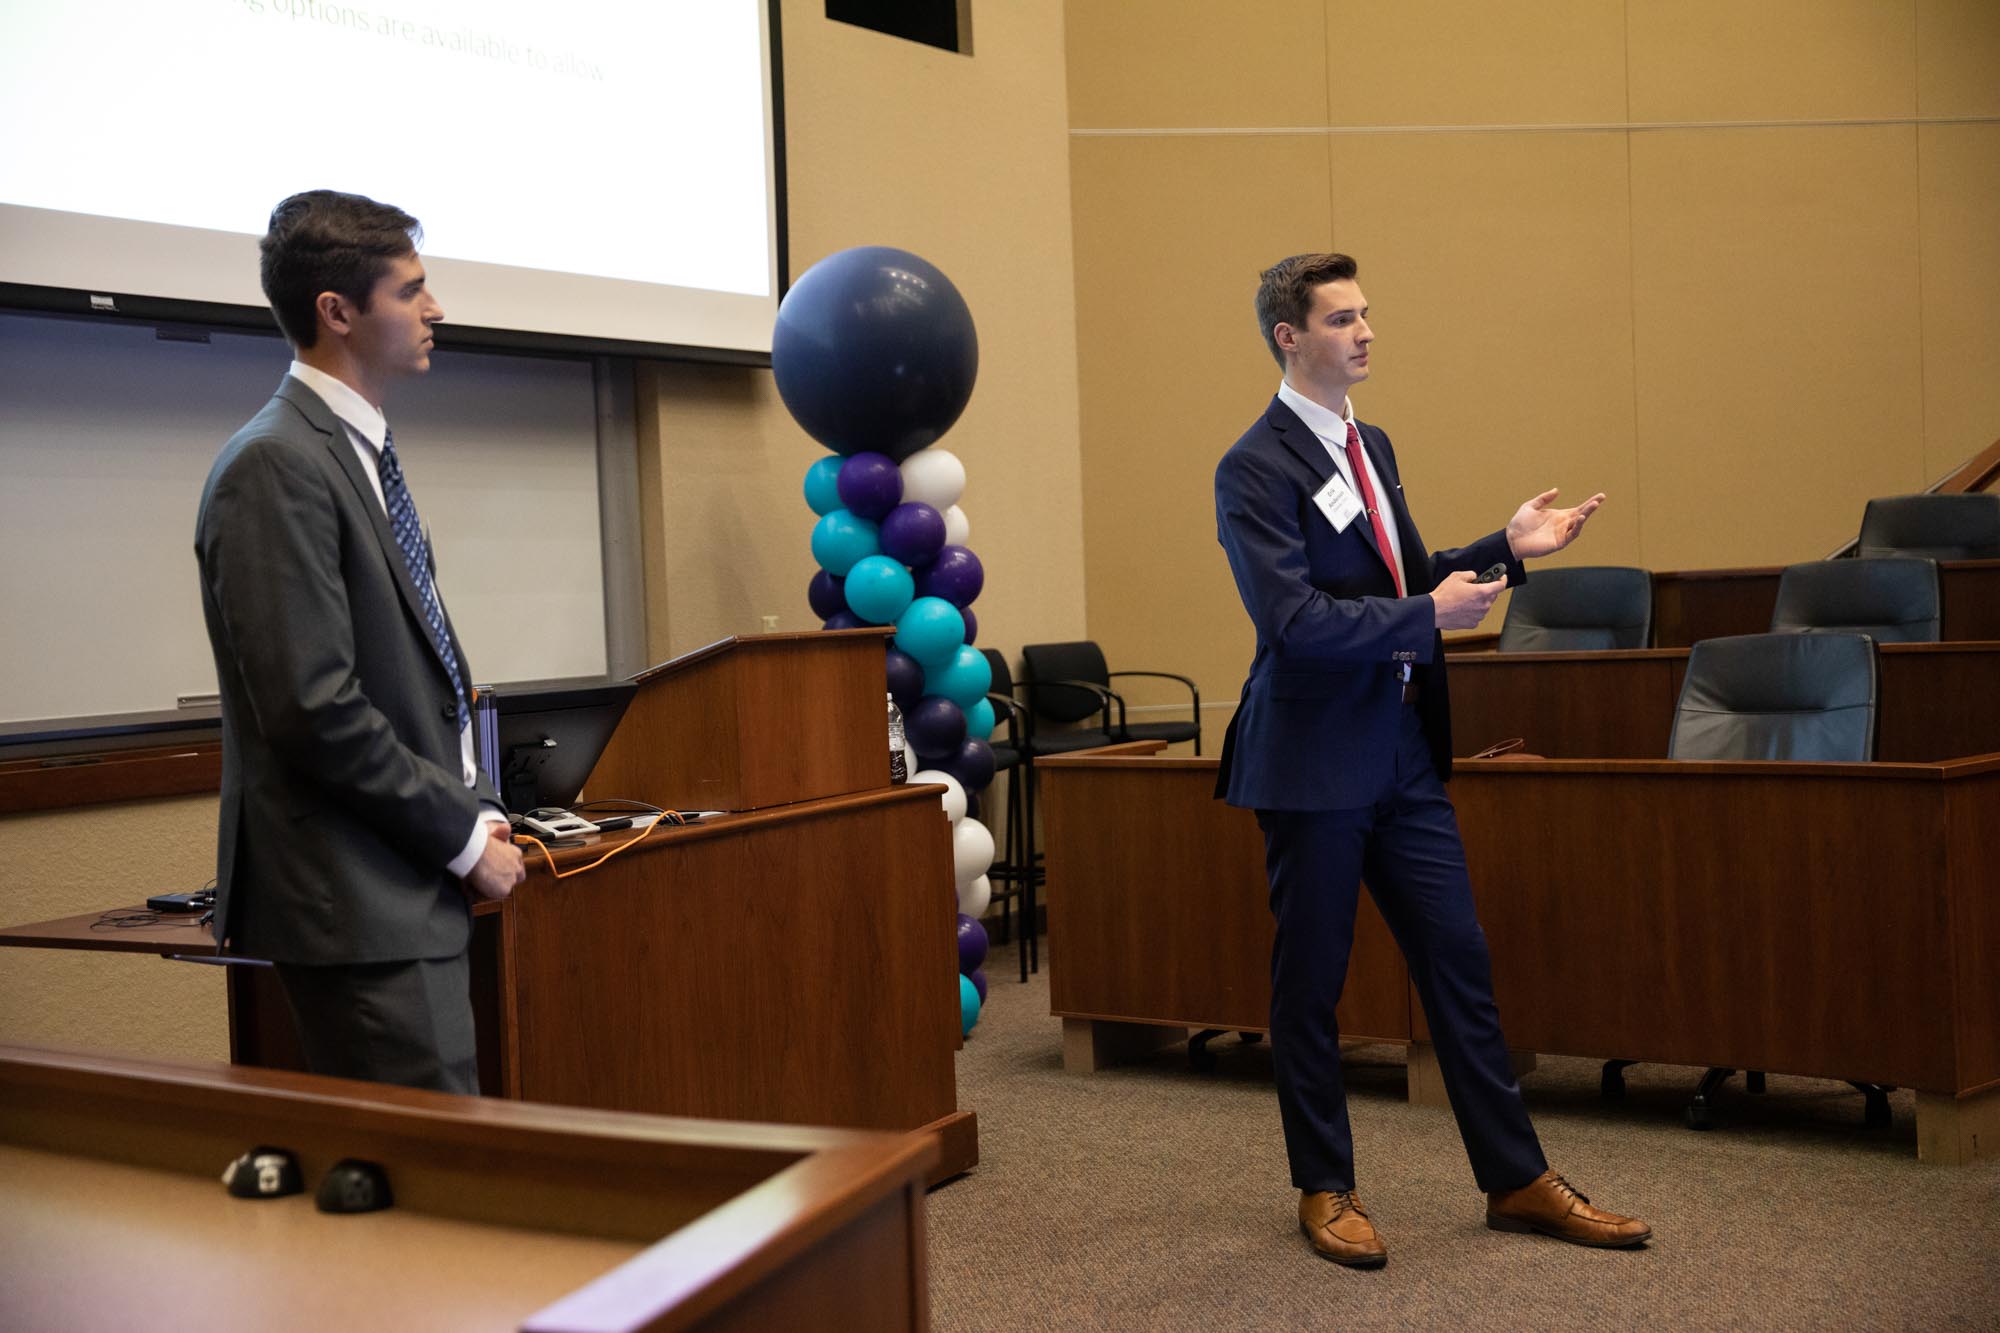 Erik Andersen and Ben Frey of Cleanair pitch during the Fowler Global Social Innovation Challenge in Schulze Hall on April 22, 2022, in Minneapolis.